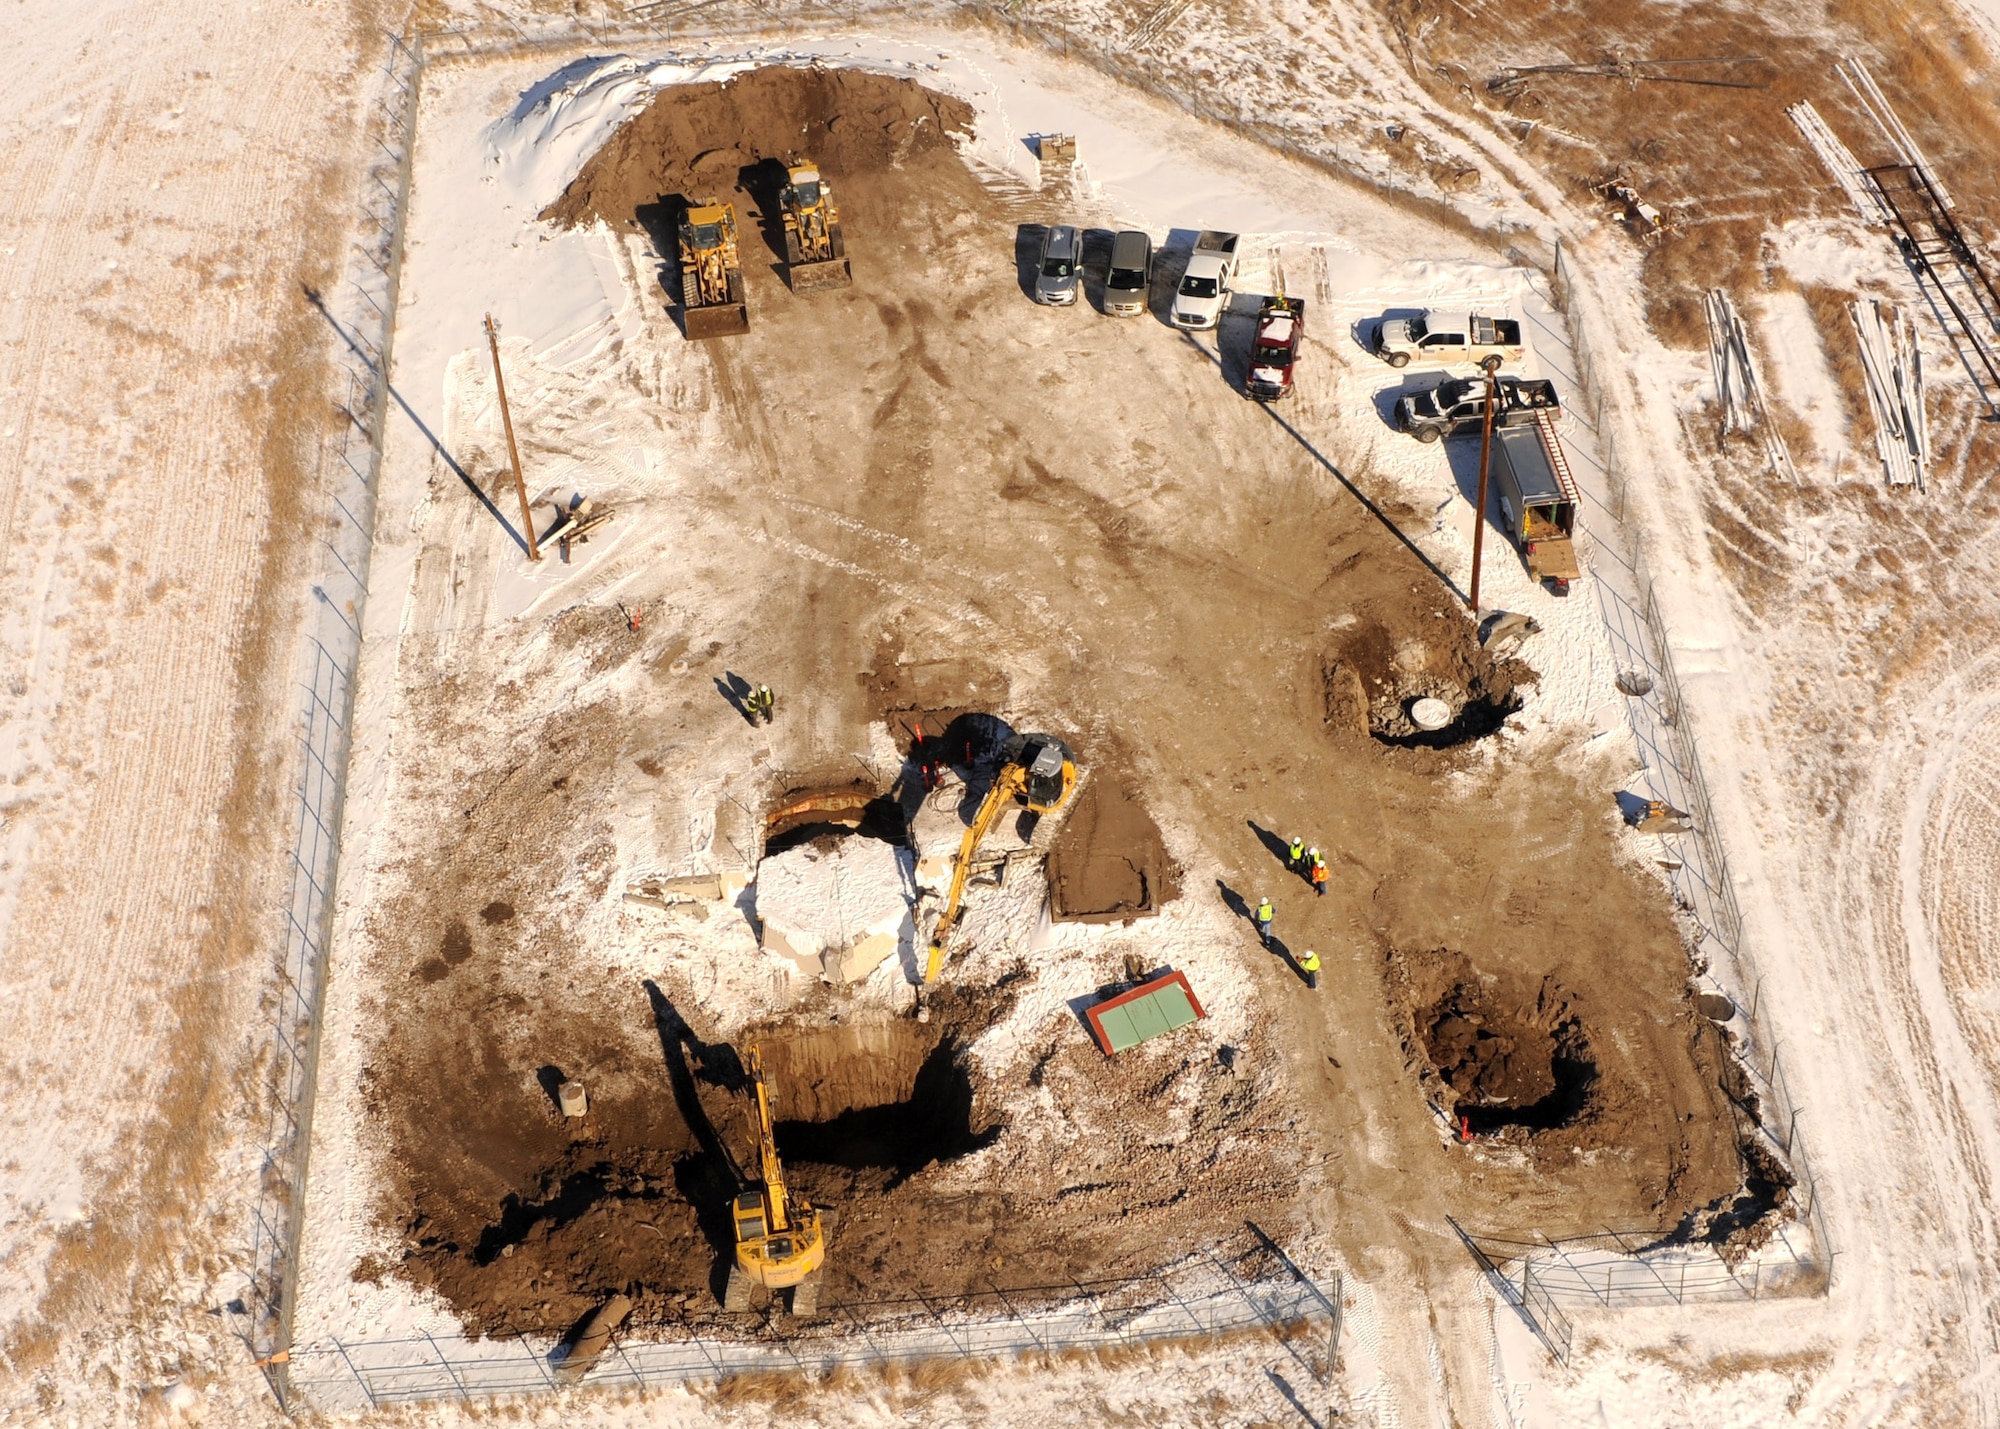 A bird’s eye view of Launch Facility R-29, Pondera County, Mont., shows construction workers preparing to pull a launcher closure door into a hole Feb. 25. The 50 Minuteman III intercontinental ballistic missile silos belonging to the 341st Missile Wing, Malmstrom Air Force Base, are being eliminated in accordance with the New Strategic Arms Reduction Treaty requirements.  The missile launch facilities being eliminated were part of the 564th Missile Squadron, which were deactivated in 2008. (U.S. Air Force photo/Senior Airman Katrina Heikkinen)